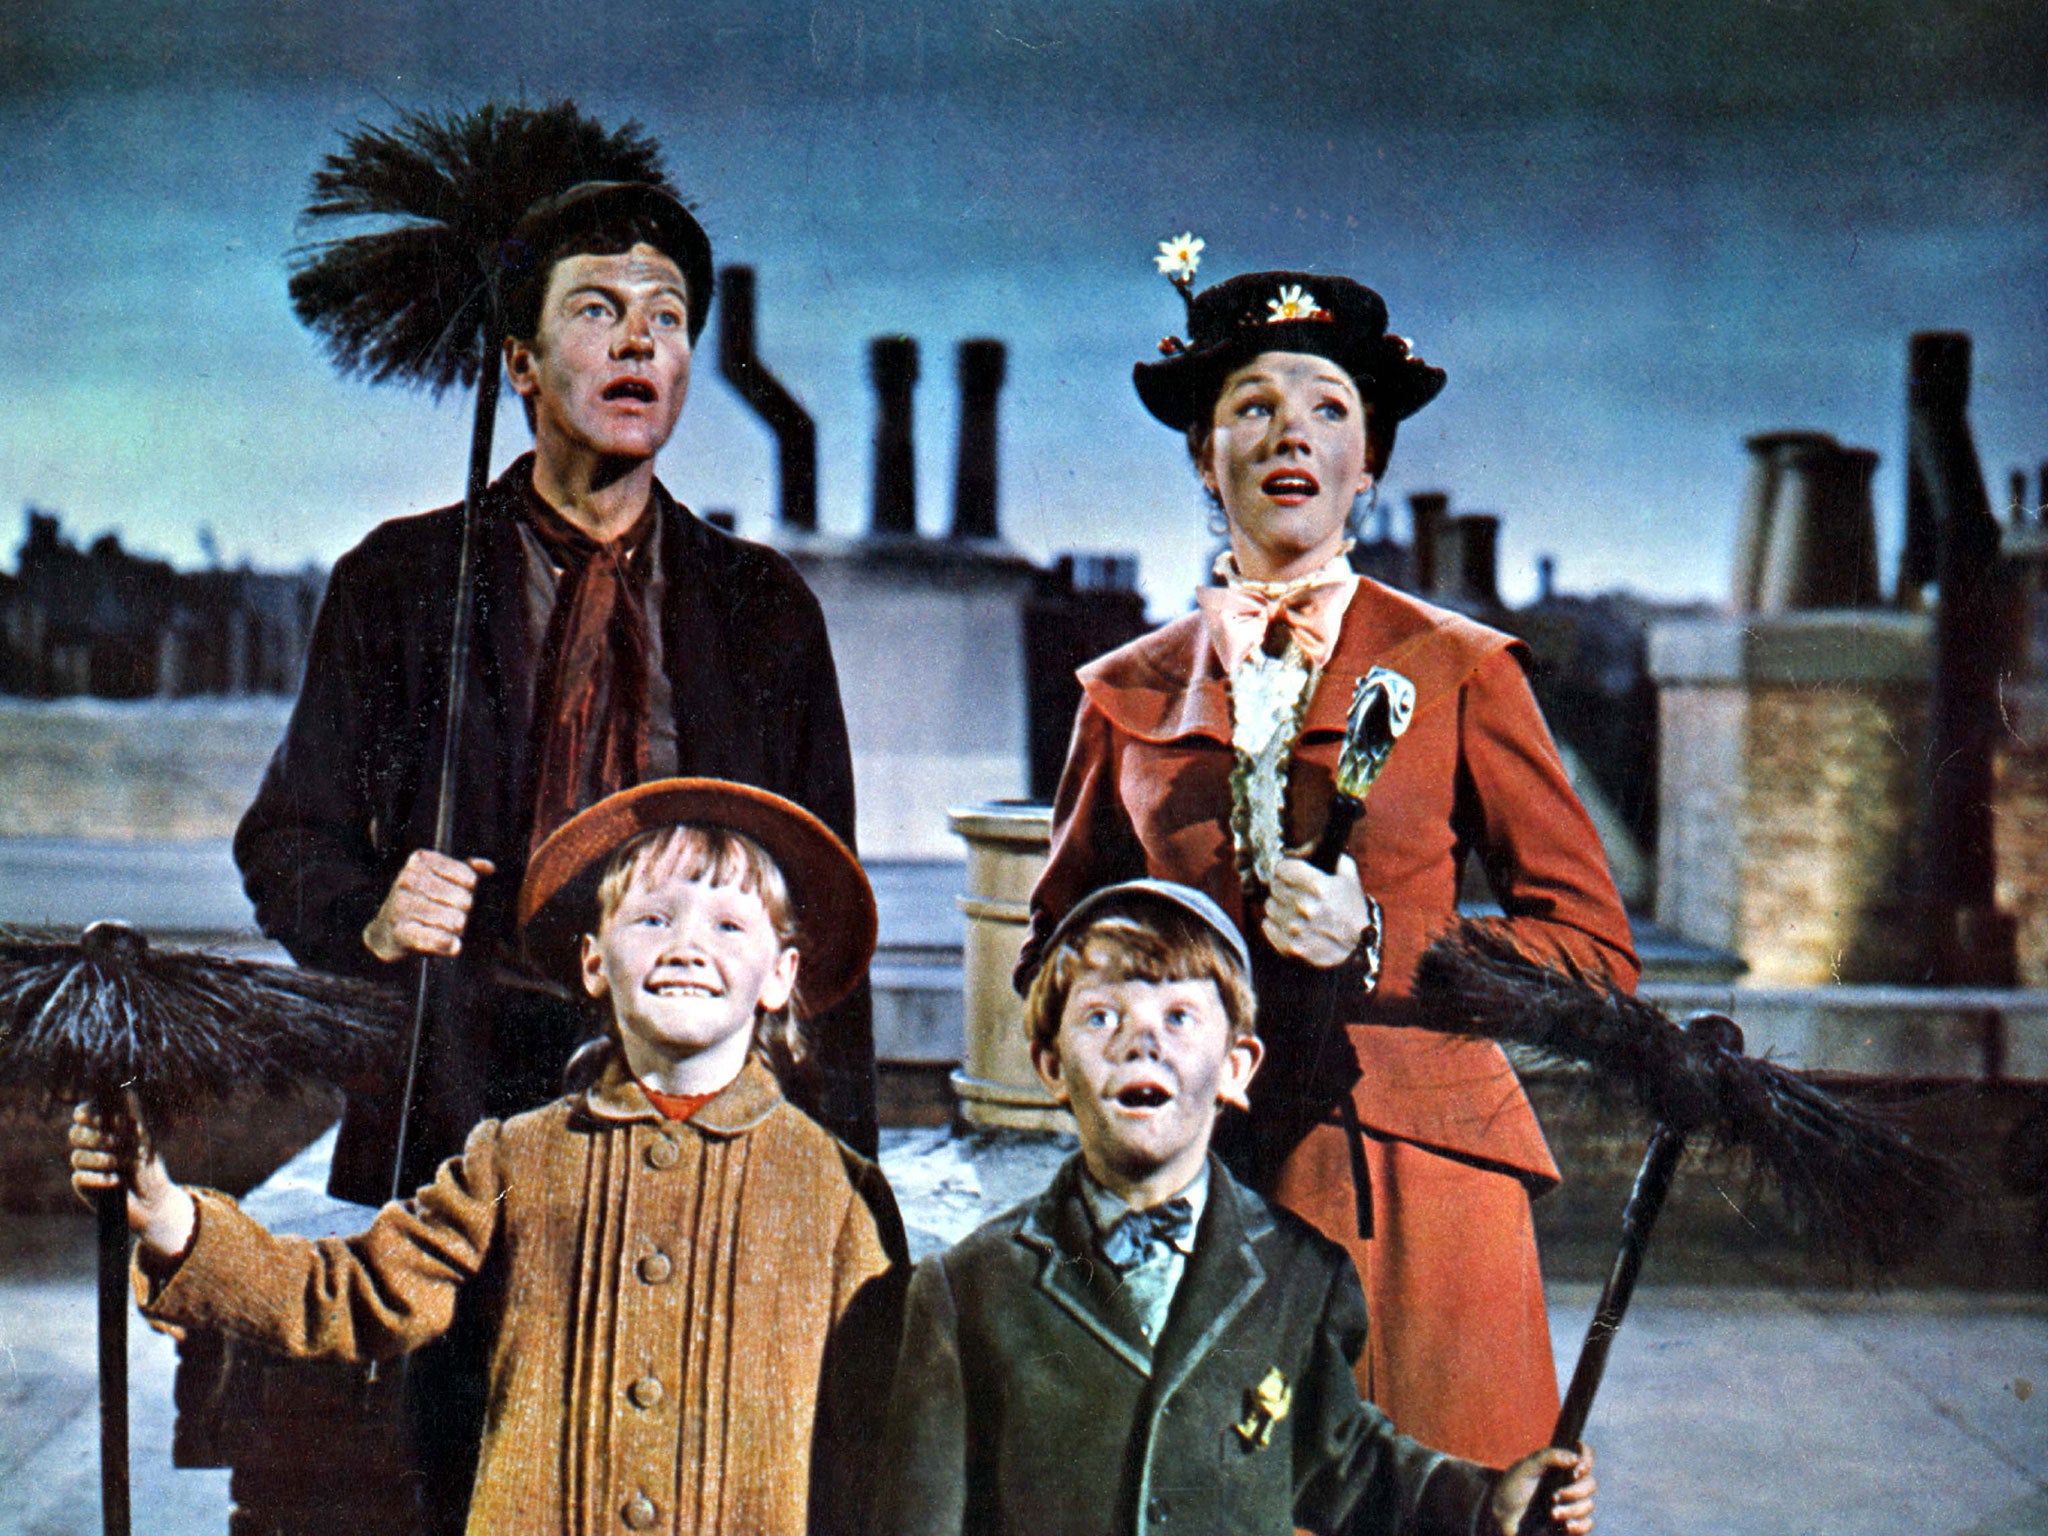 Mary Poppins is set to return